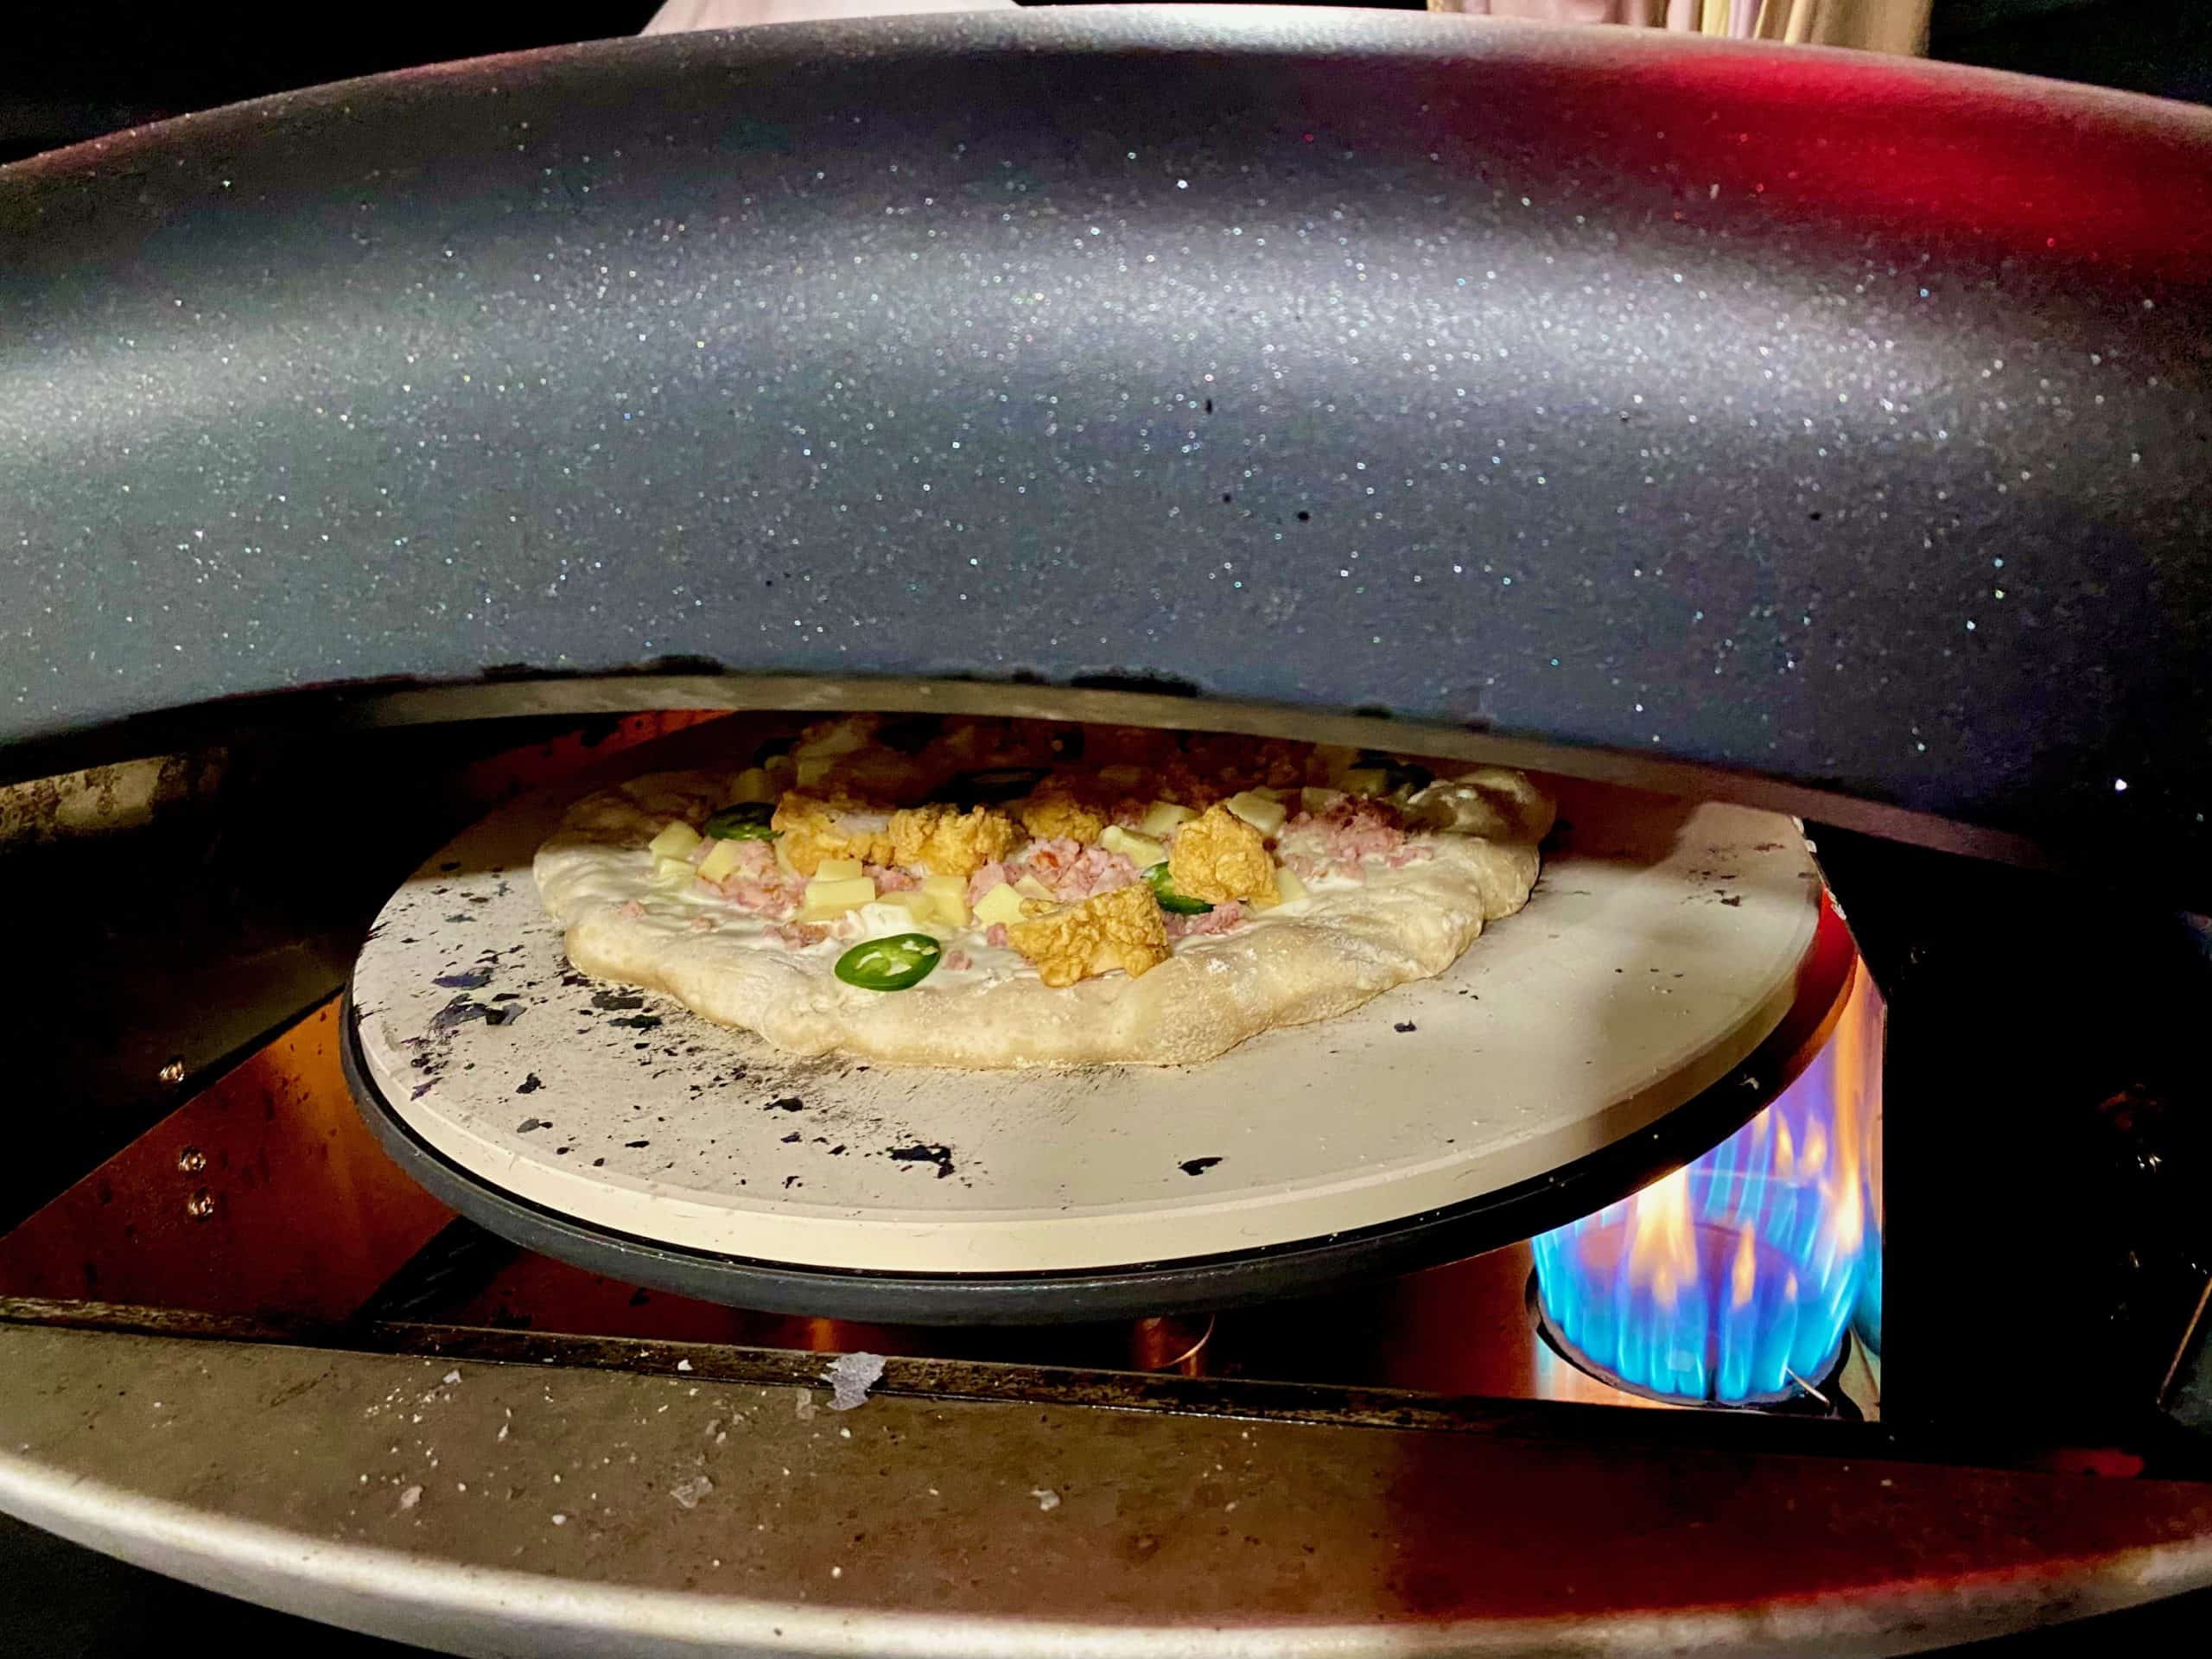 pizza cooking in an oven